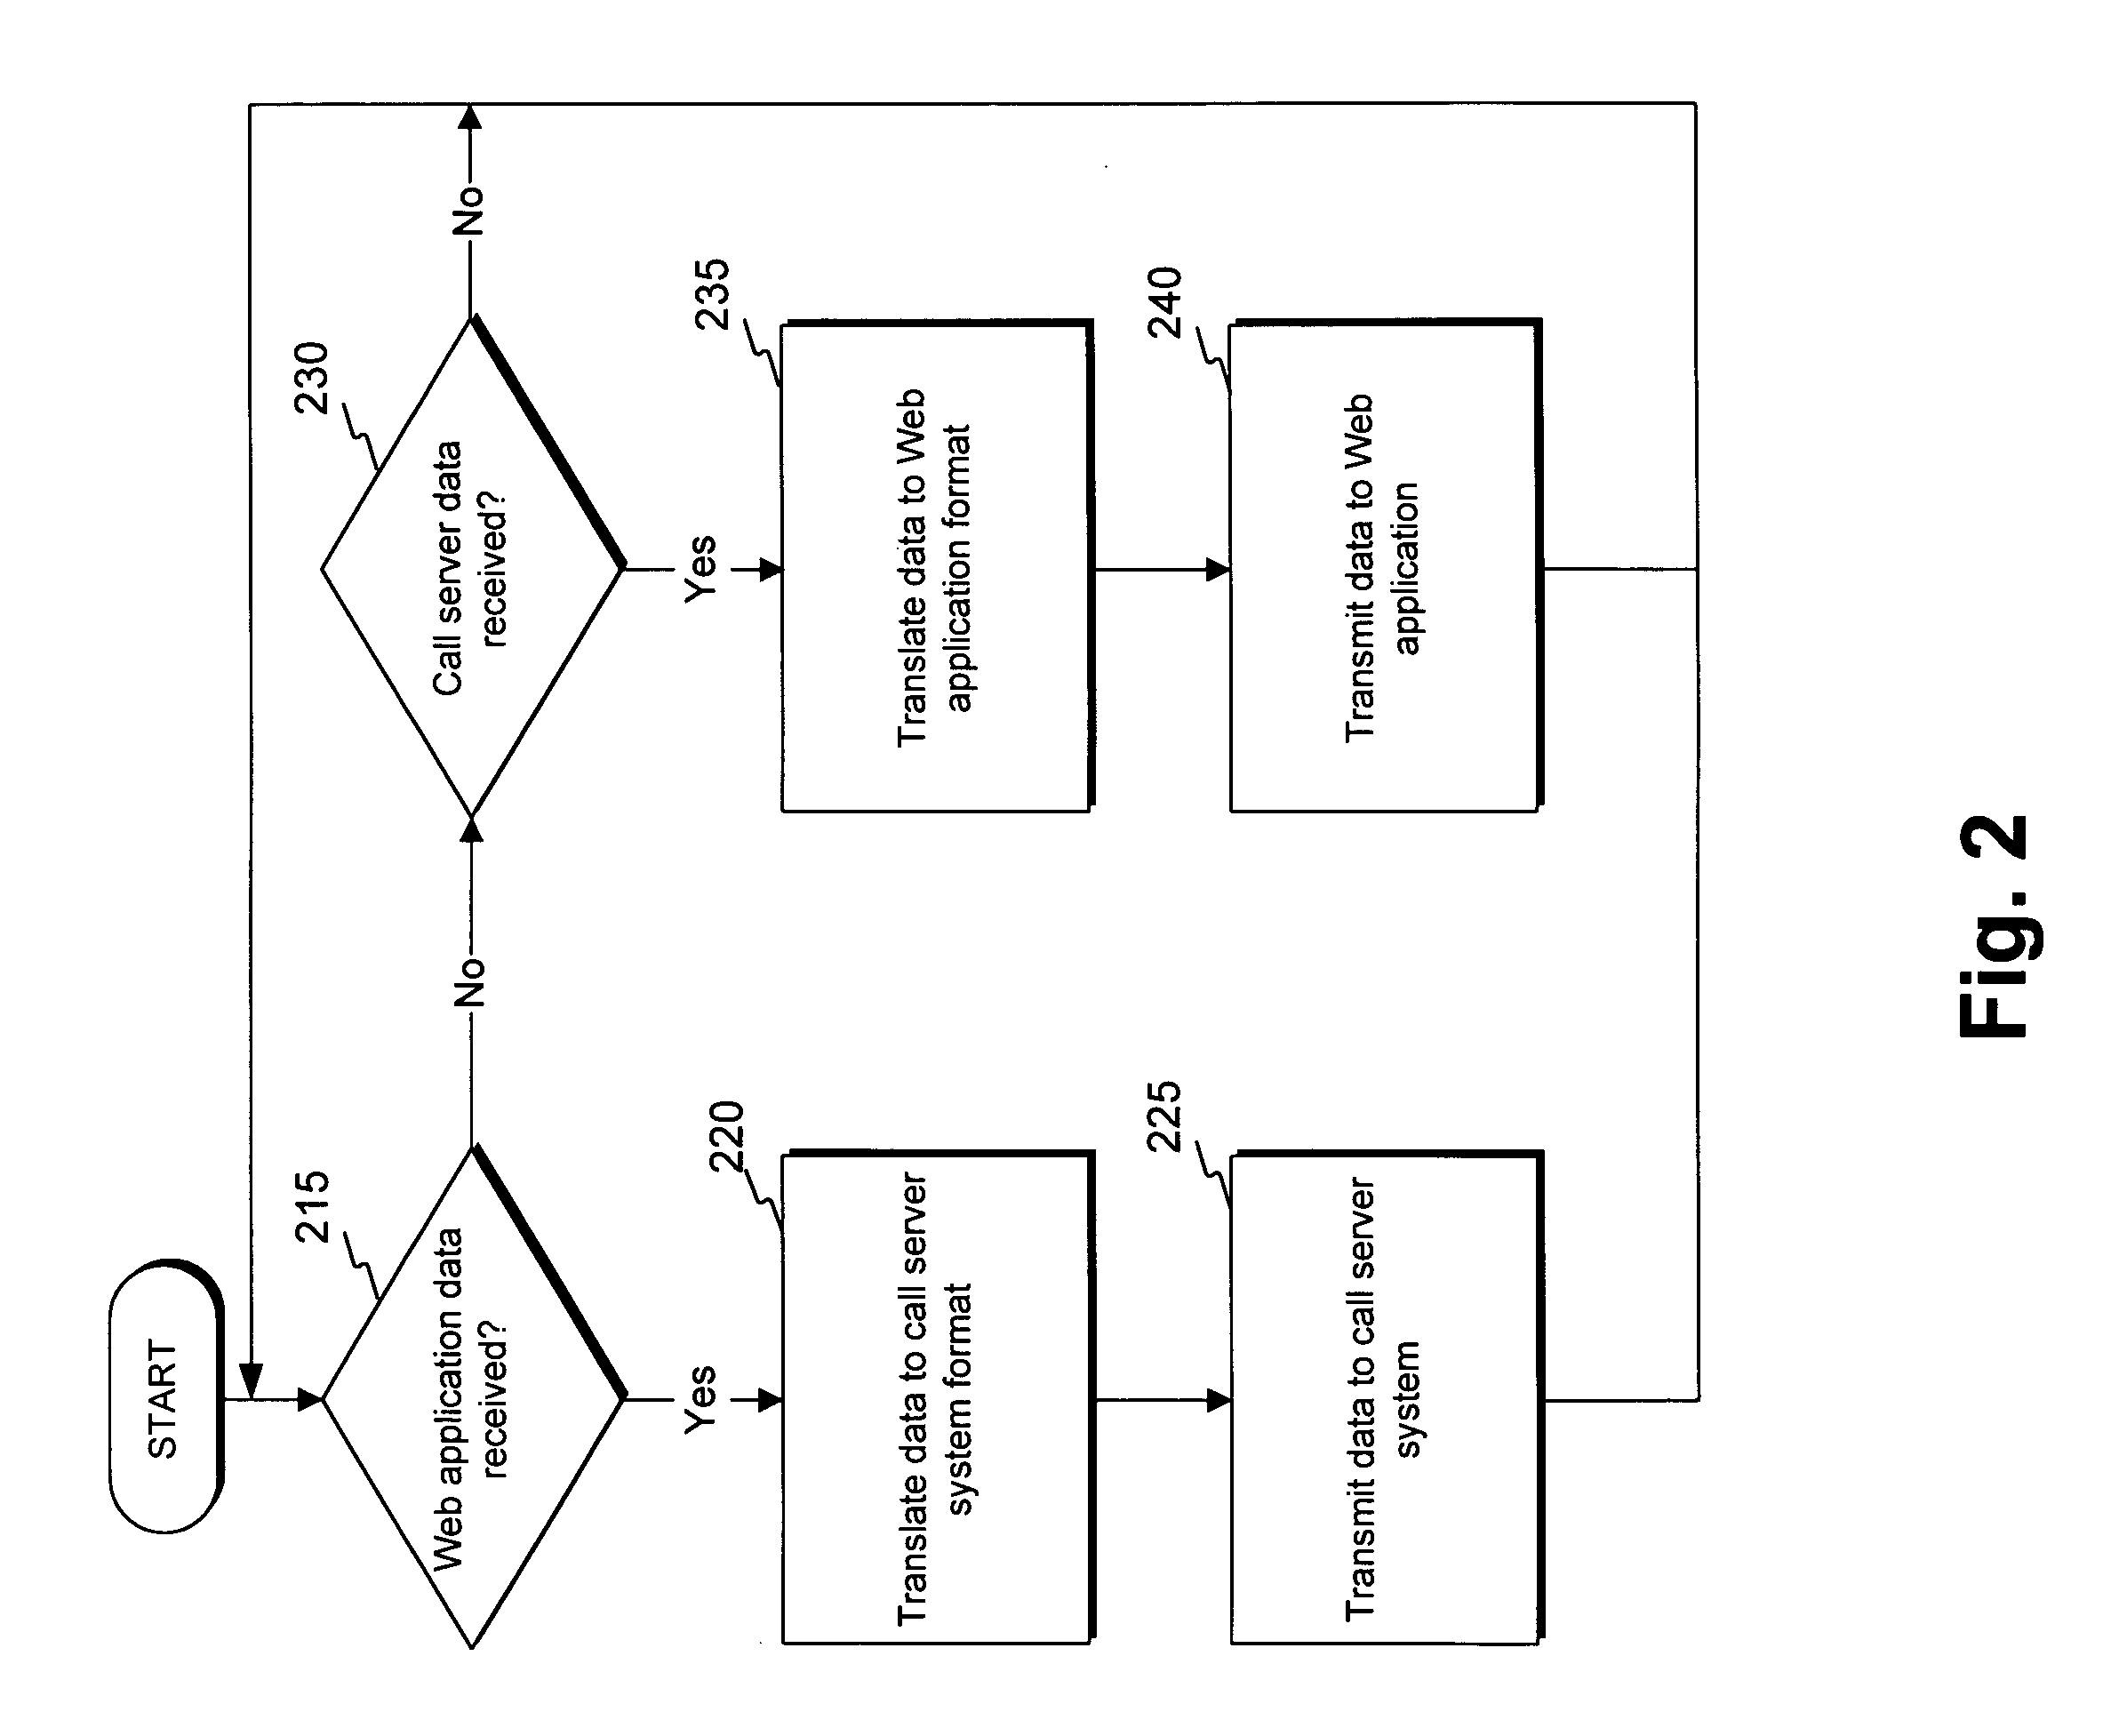 Method, apparatus and article of manufacture for web-based control of a unified multi-service communication system